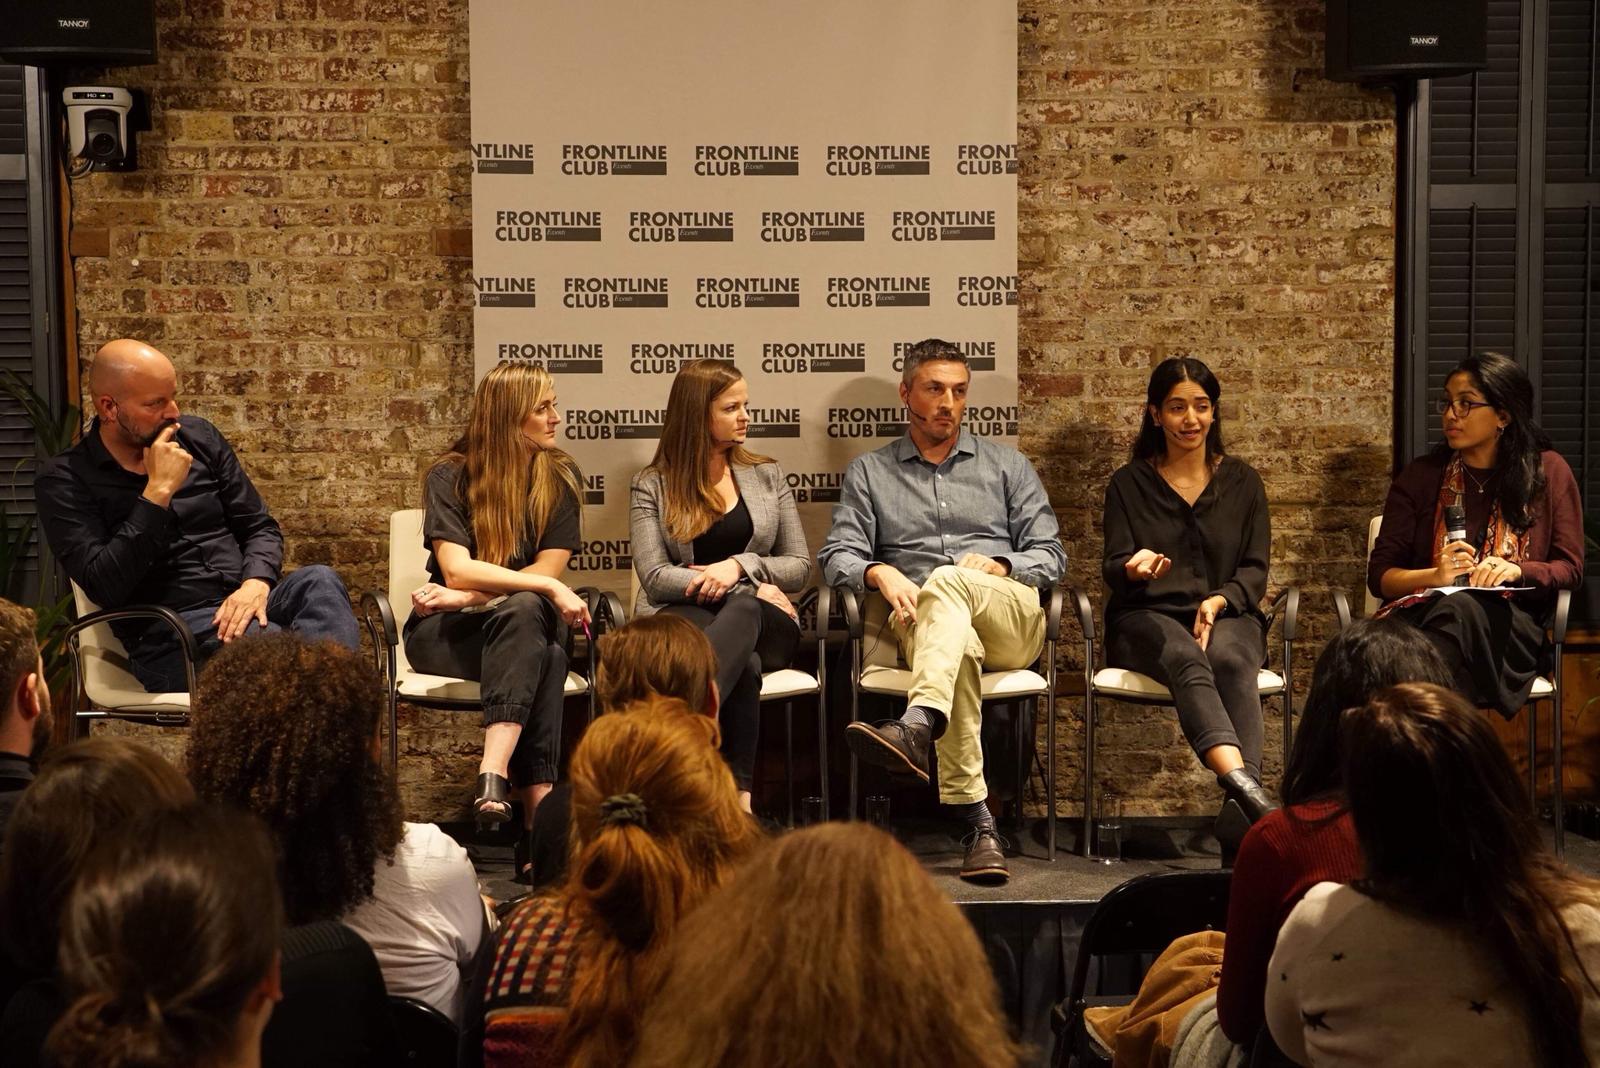 Photography's #MeToo movement was the focus of a forum at London's Frontline Club in October. Participants included (from left) Lars Boering, managing director of World Press Photo; photojournalist Anastasia Taylor-Lind,  journalist Kristen Chick;  photojournalist Finbarr O'Reilly; photographer, filmmaker, and writer Yumna Al-Arashi; and Naina Bajekal, deputy international editor at Time